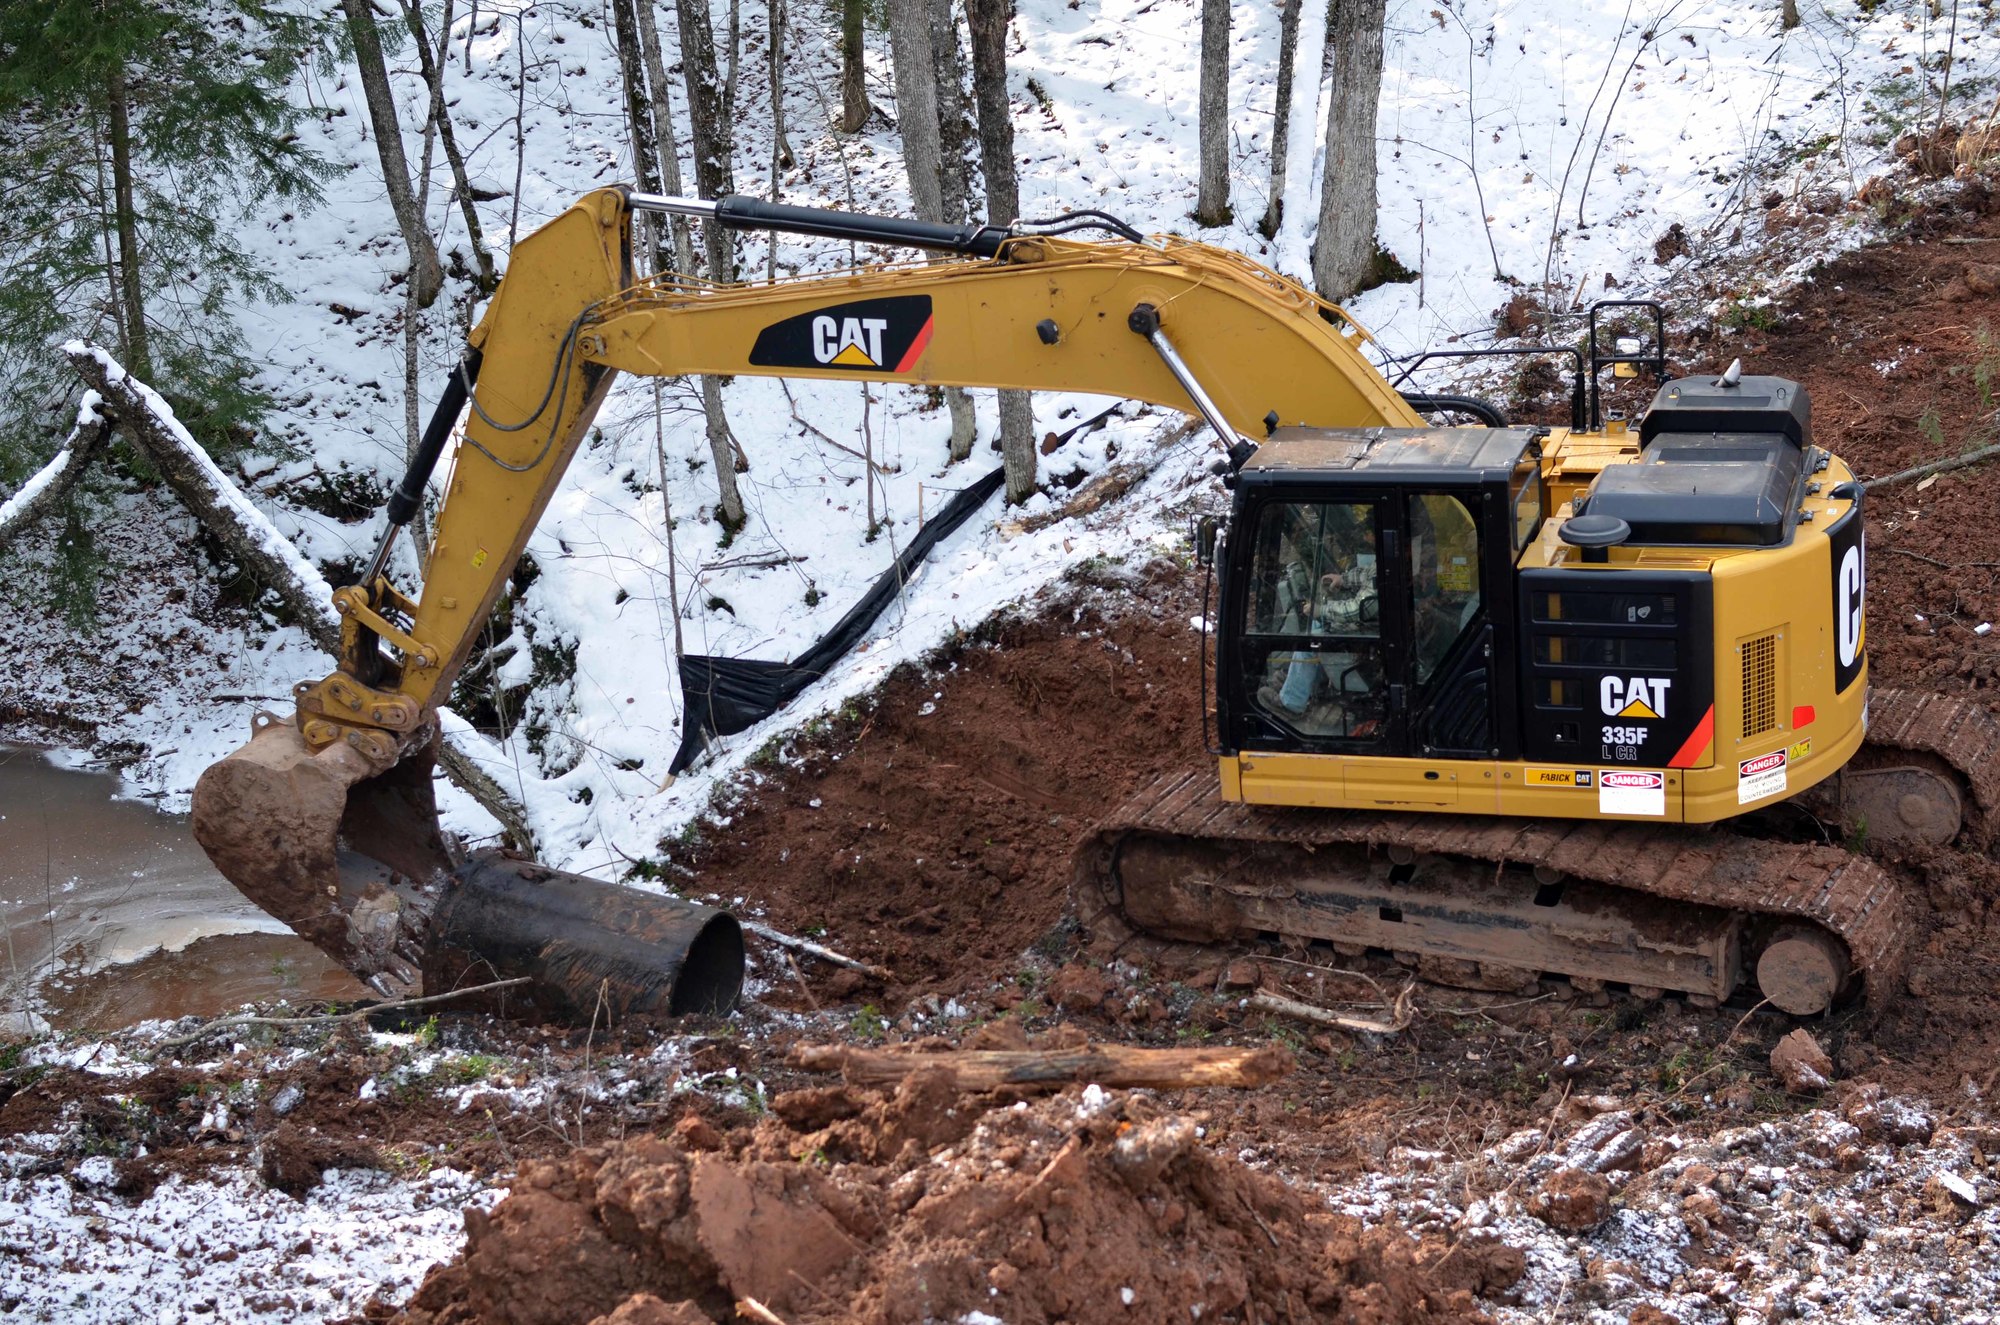 The first section of the old culvert is removed.